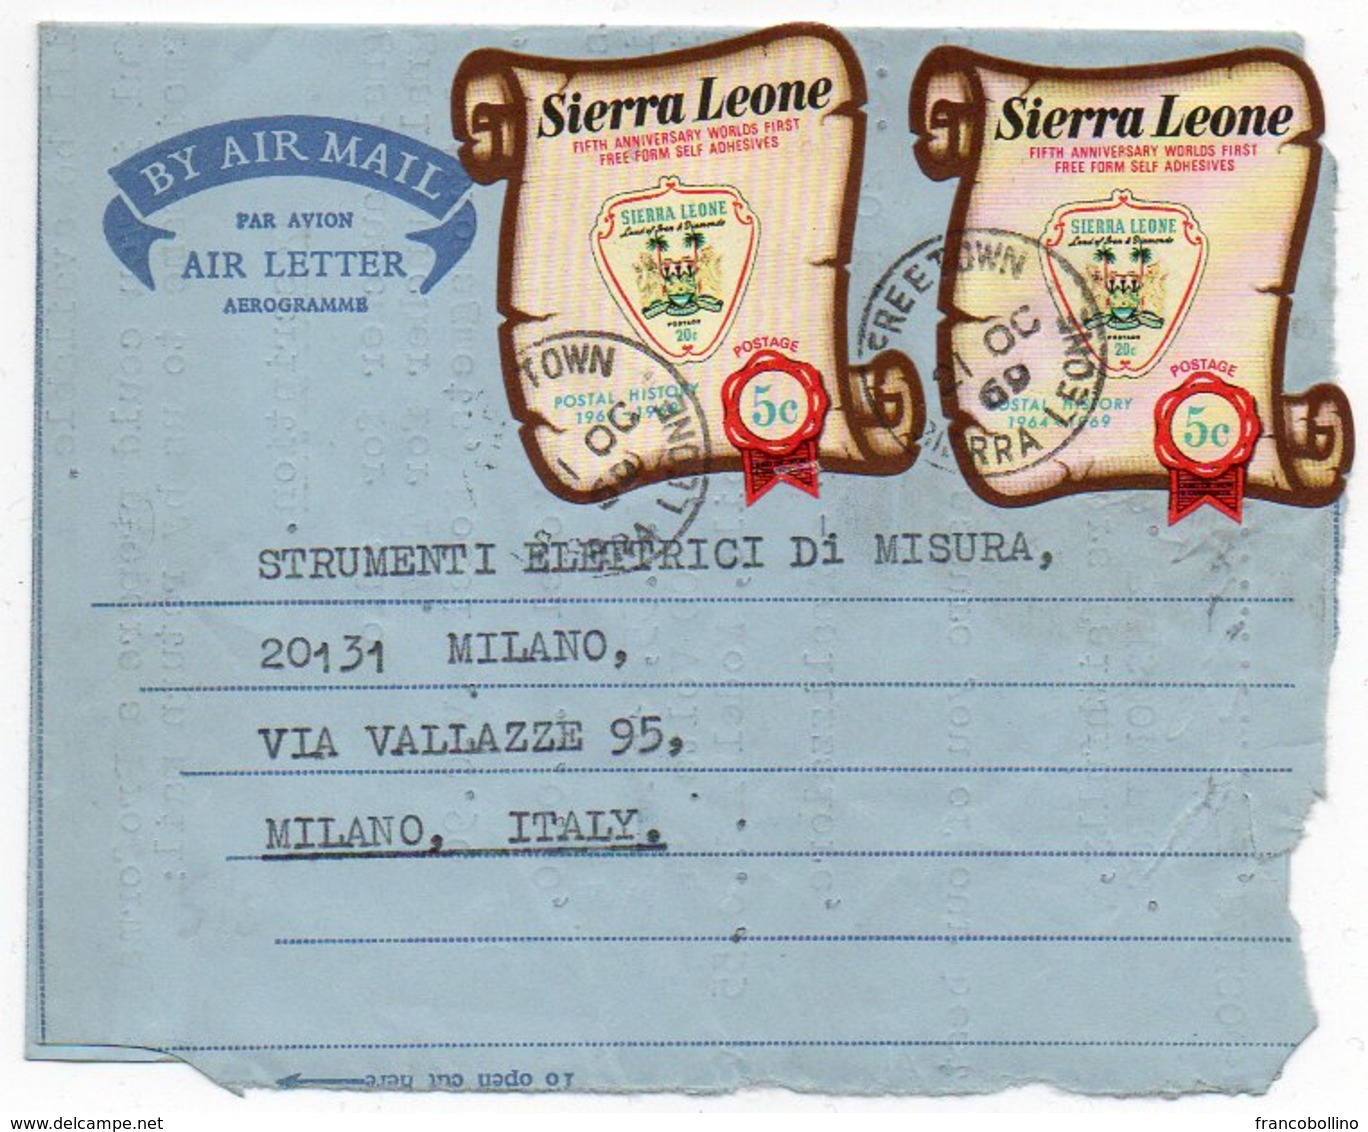 SIERRA LEONE - AIR LETTER/AEROGRAMME TO ITALY 1969 / THEMATIC STAMPS-POSTAL HISTORY - Sierra Leone (1961-...)